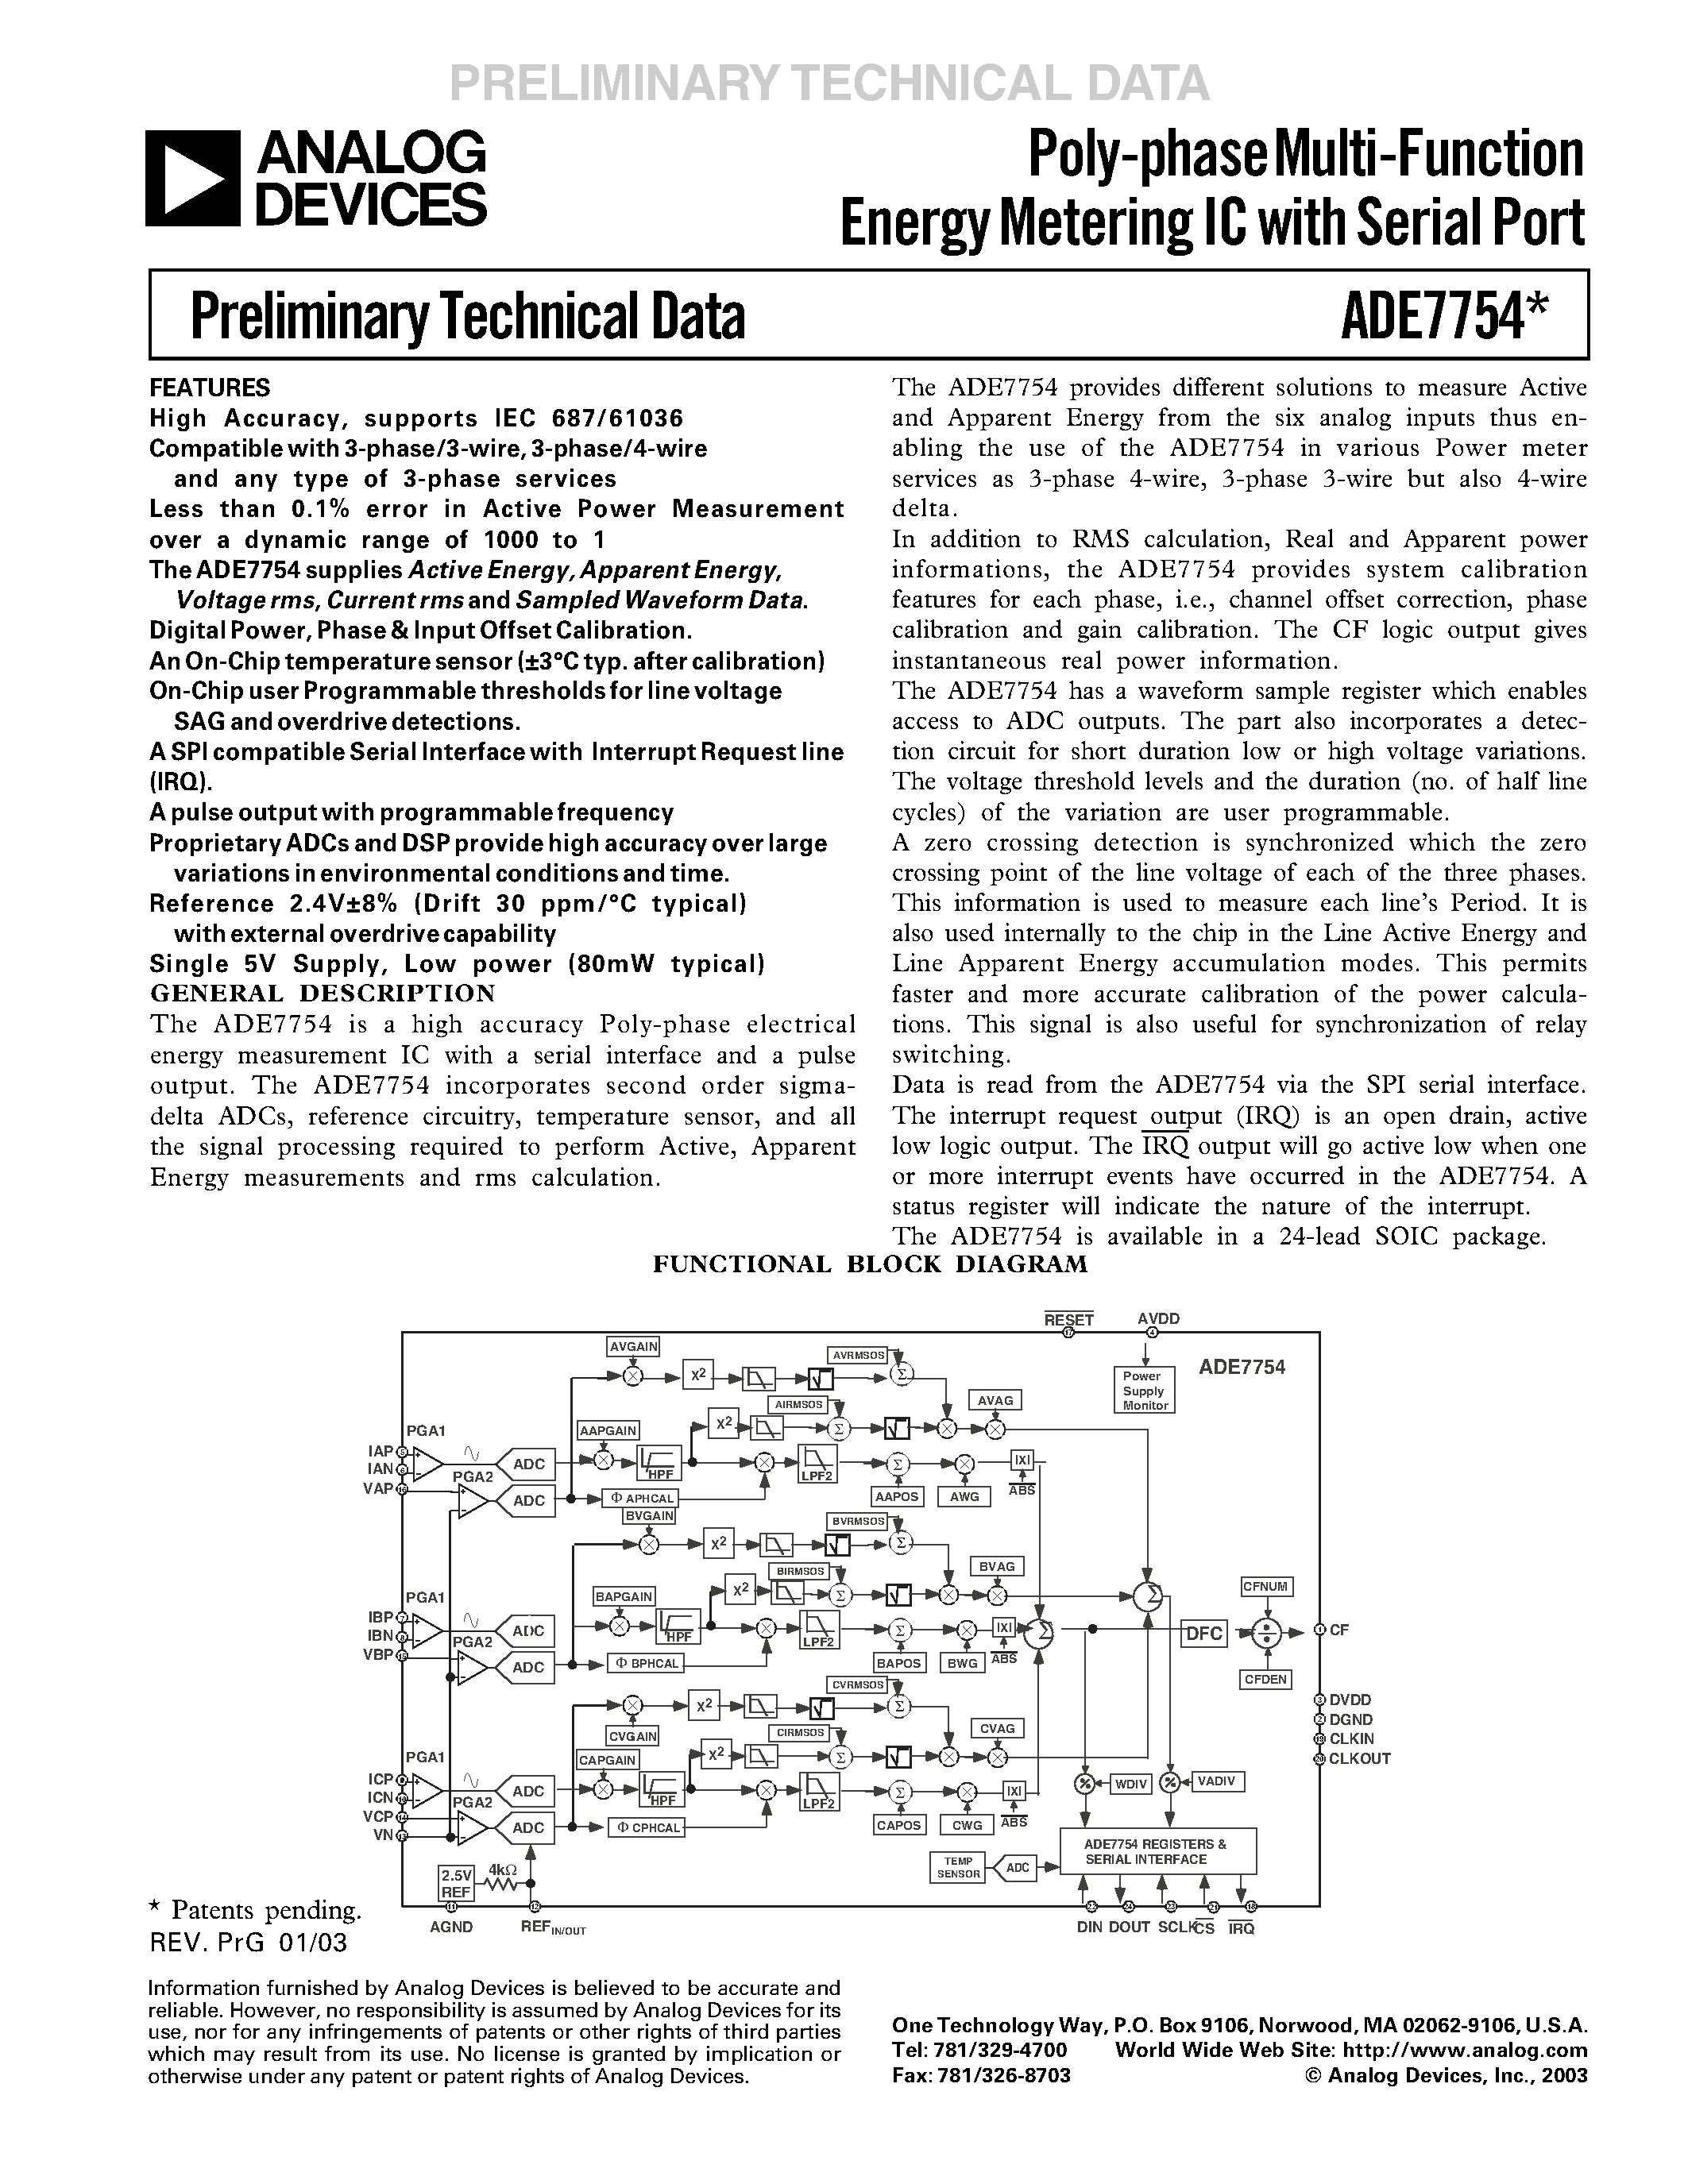 Даташит ADE7754ARRL - Poly-phase Multi-Function Energy Metering IC with Serial Port страница 1